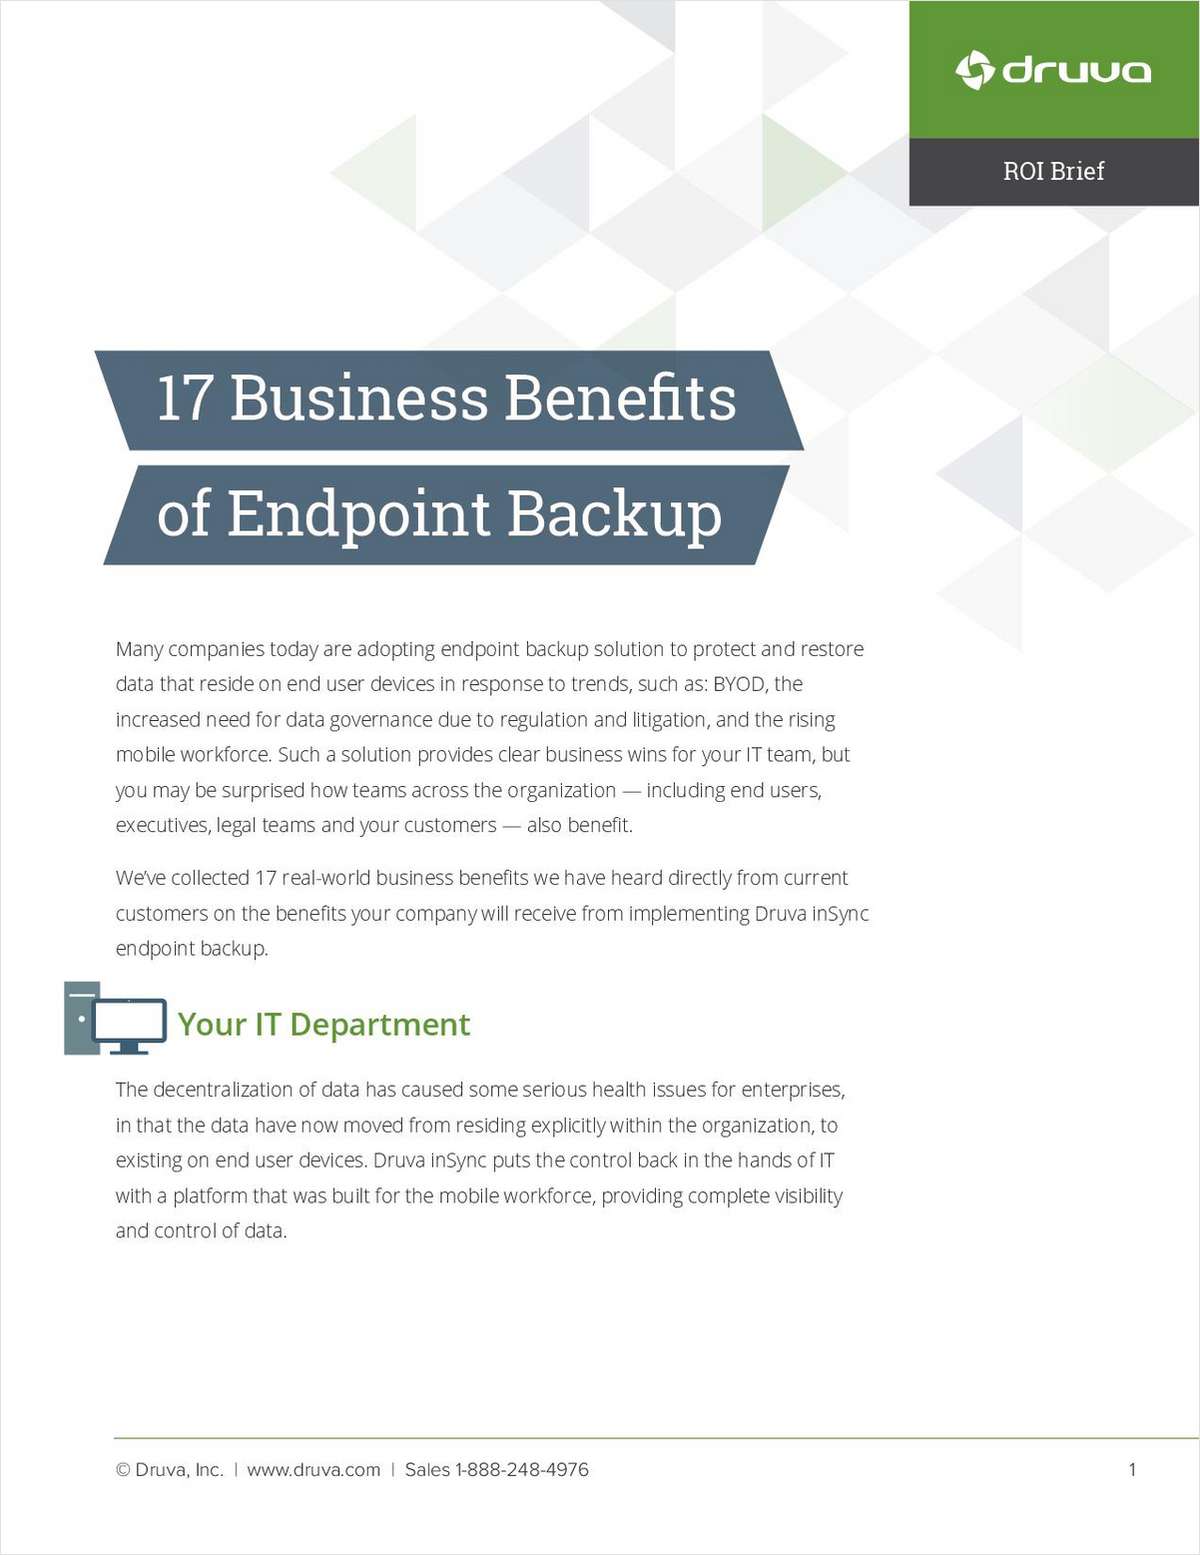 17 Business Benefits of Endpoint Backup